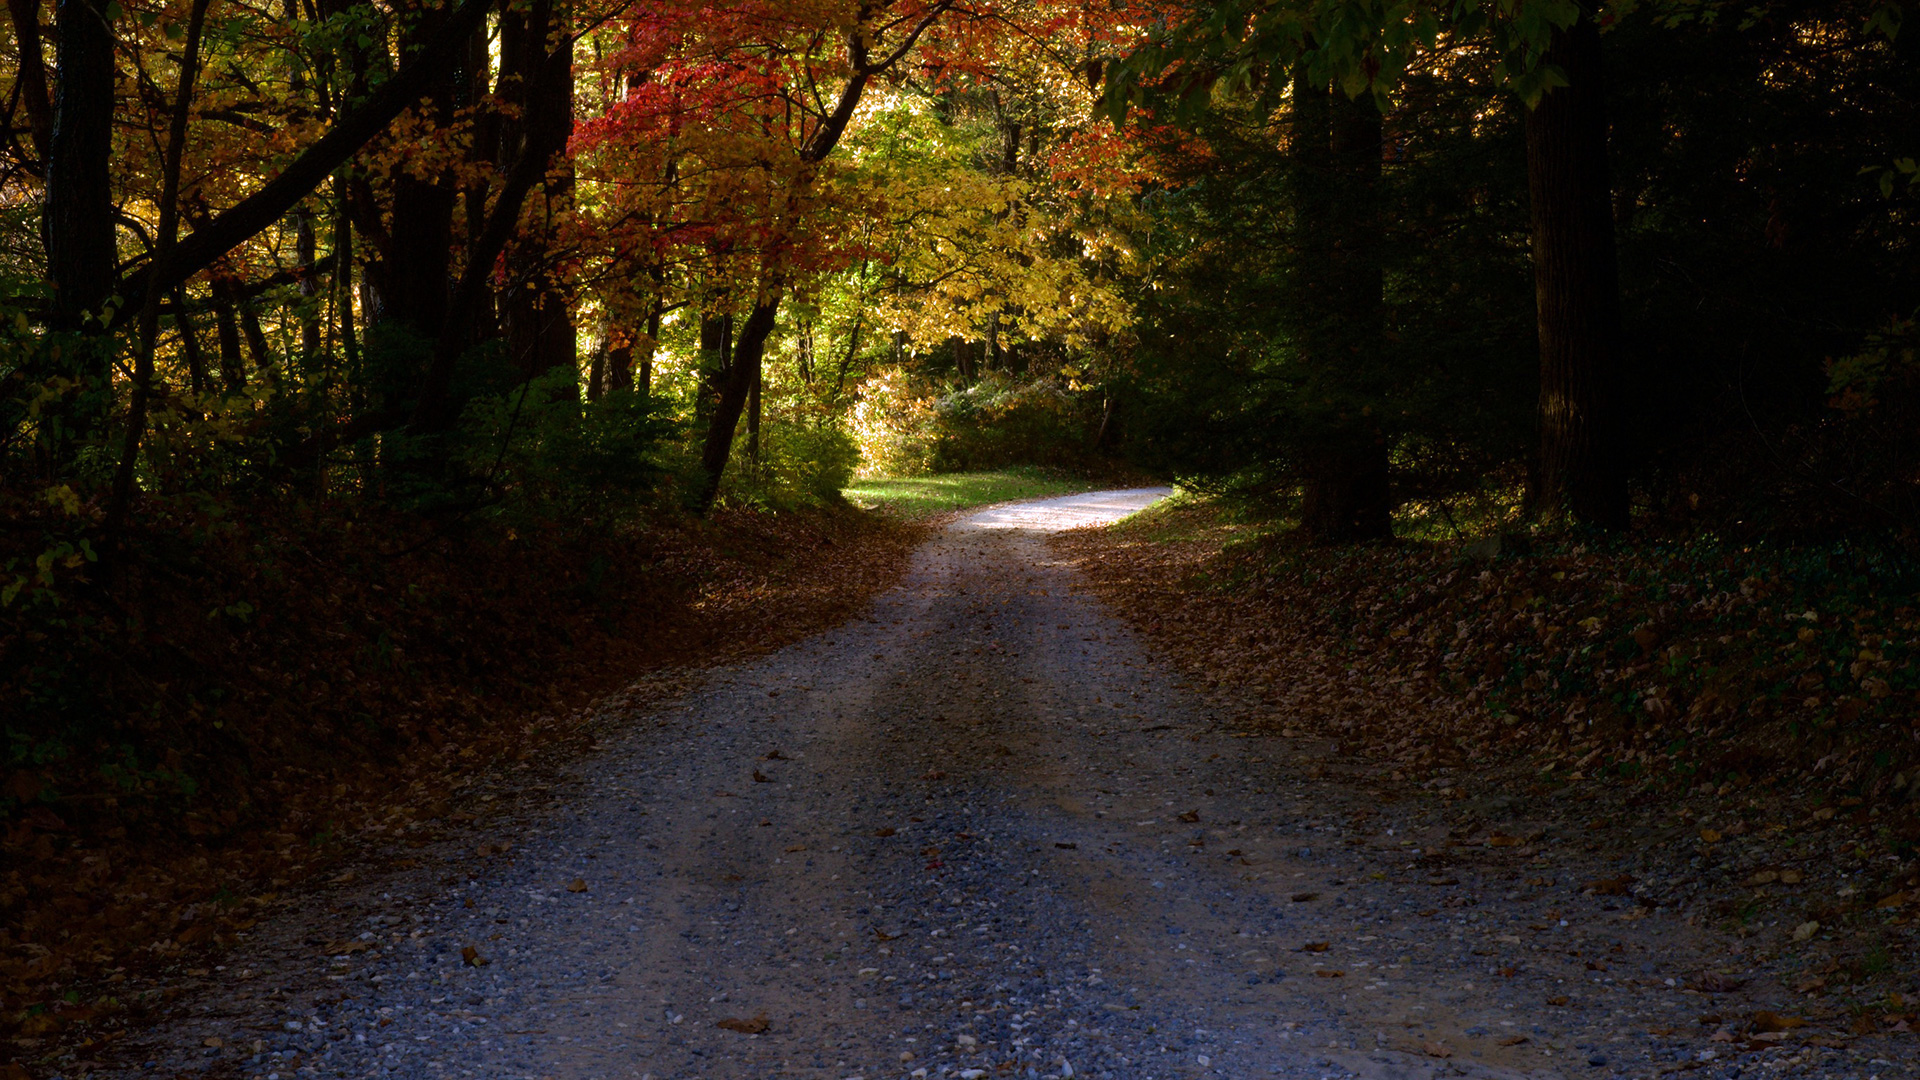 The road away from the Emerson house in northern Georgia (photograph by Stacy Reece)